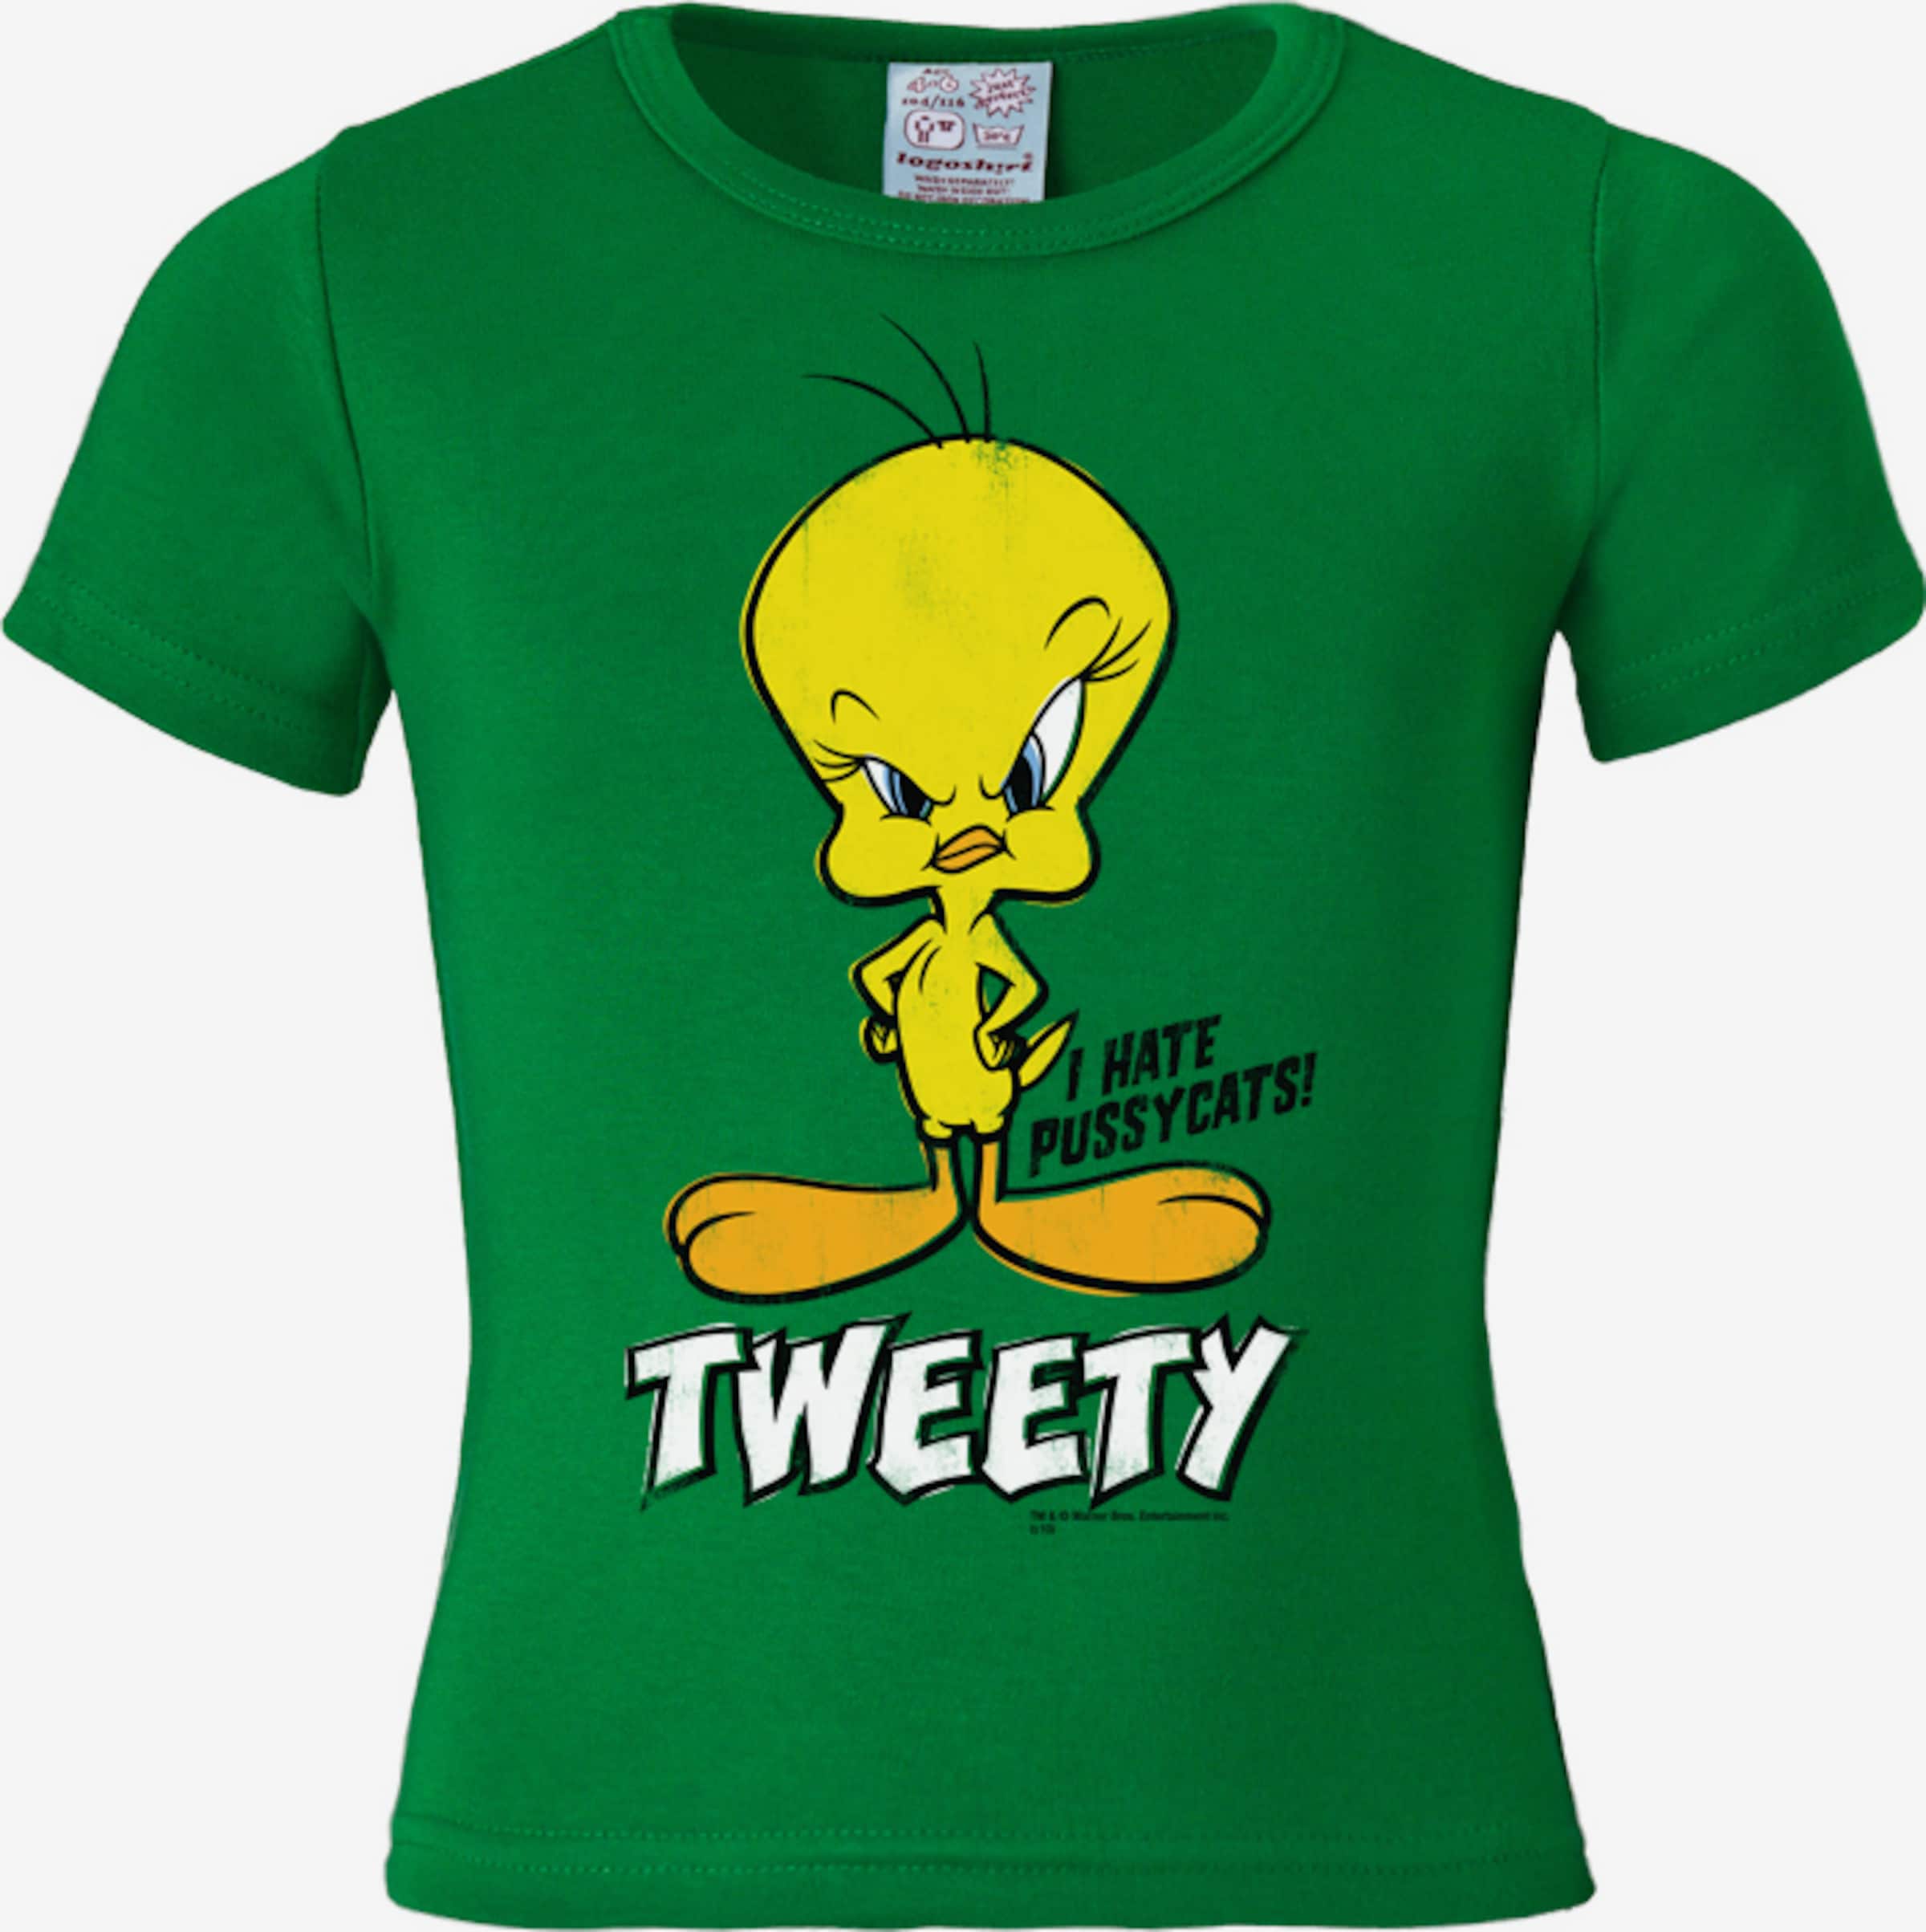 | I Hate \'Tweety - Green YOU LOGOSHIRT Shirt ABOUT Vogel\' Pussycats in